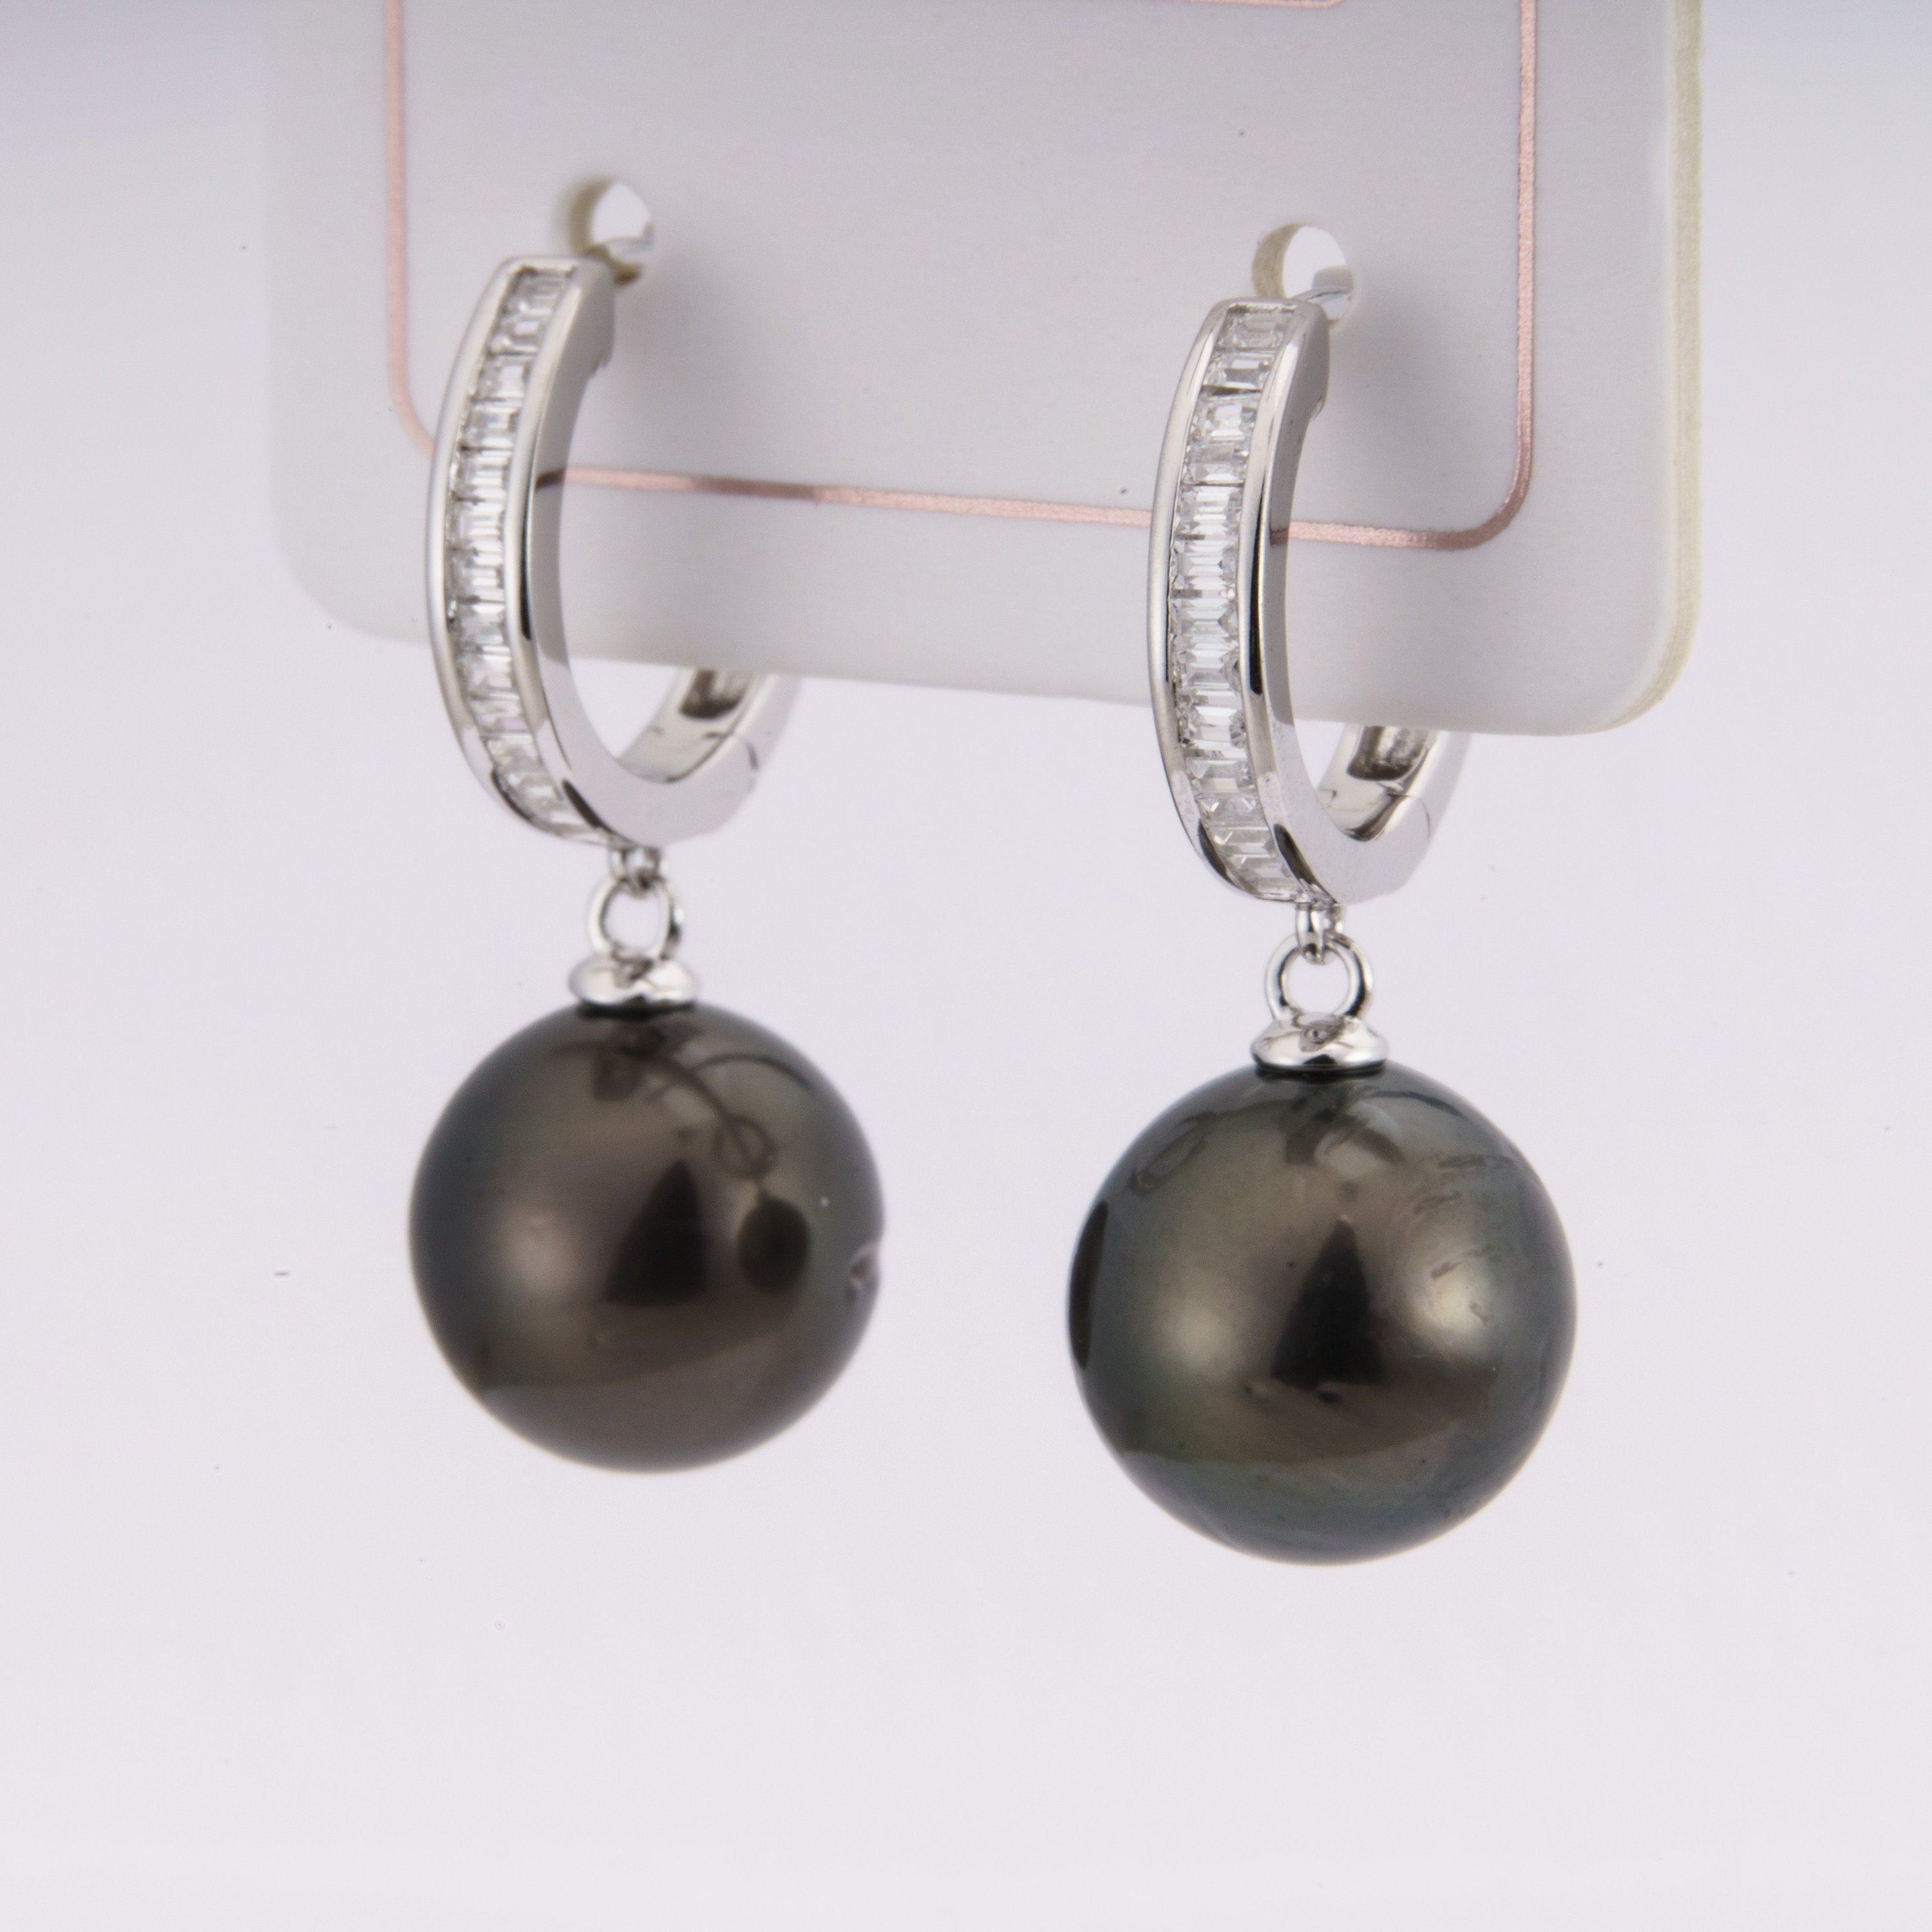 Tahitian pearl earrings 10mm, 925 sterling silver with rhodium finish and cubic zirconia